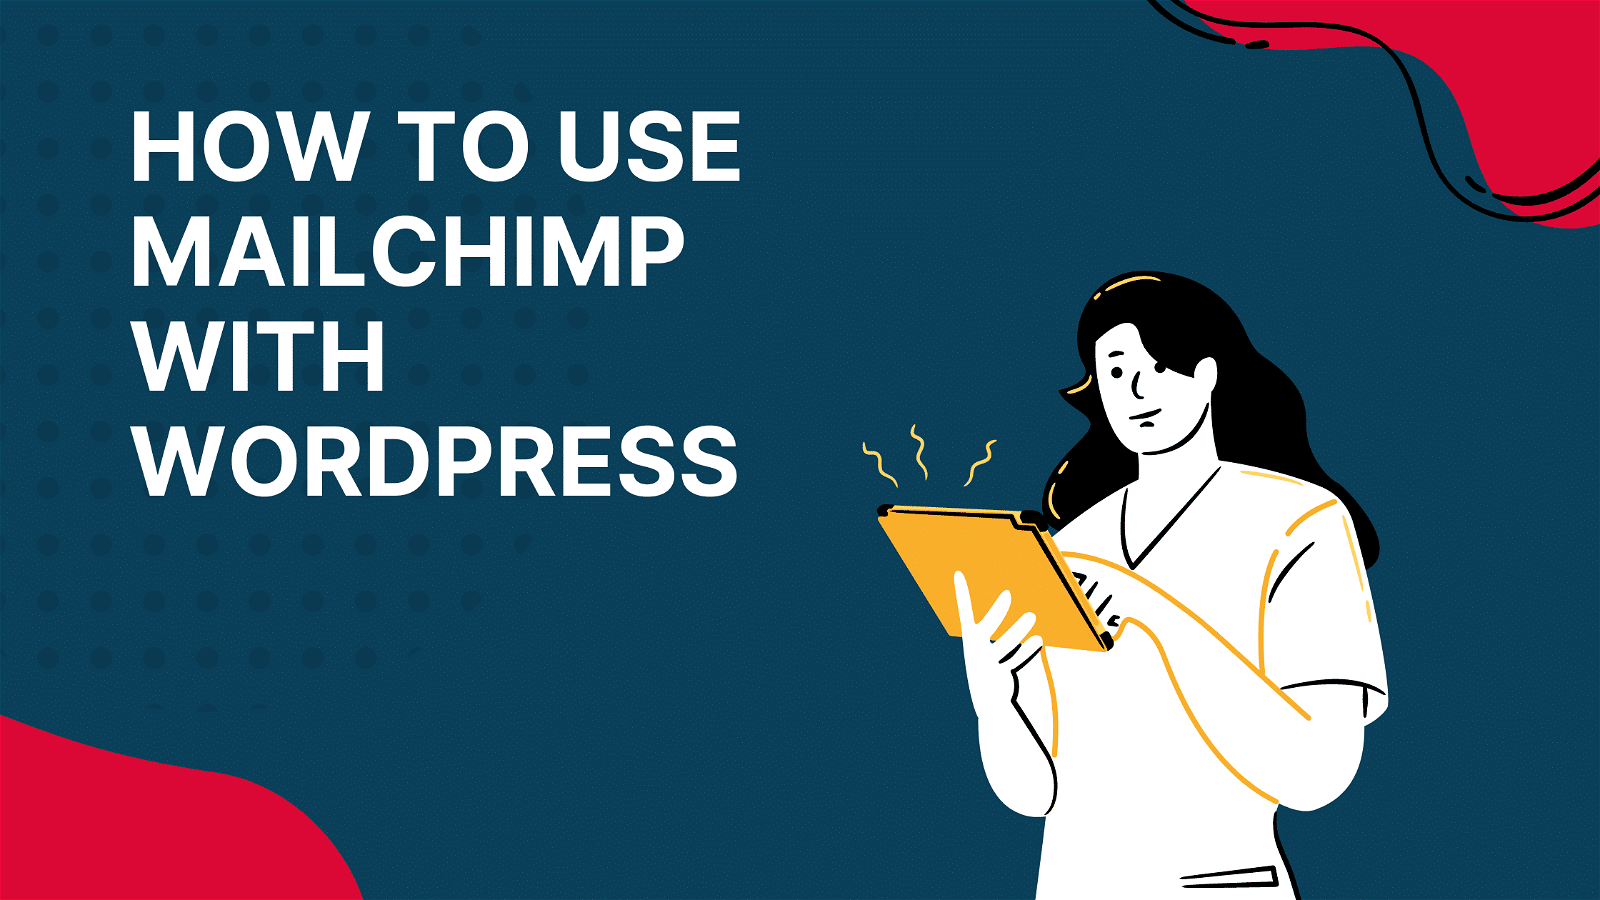 This image is providing instructions on how to integrate MailChimp with WordPress.